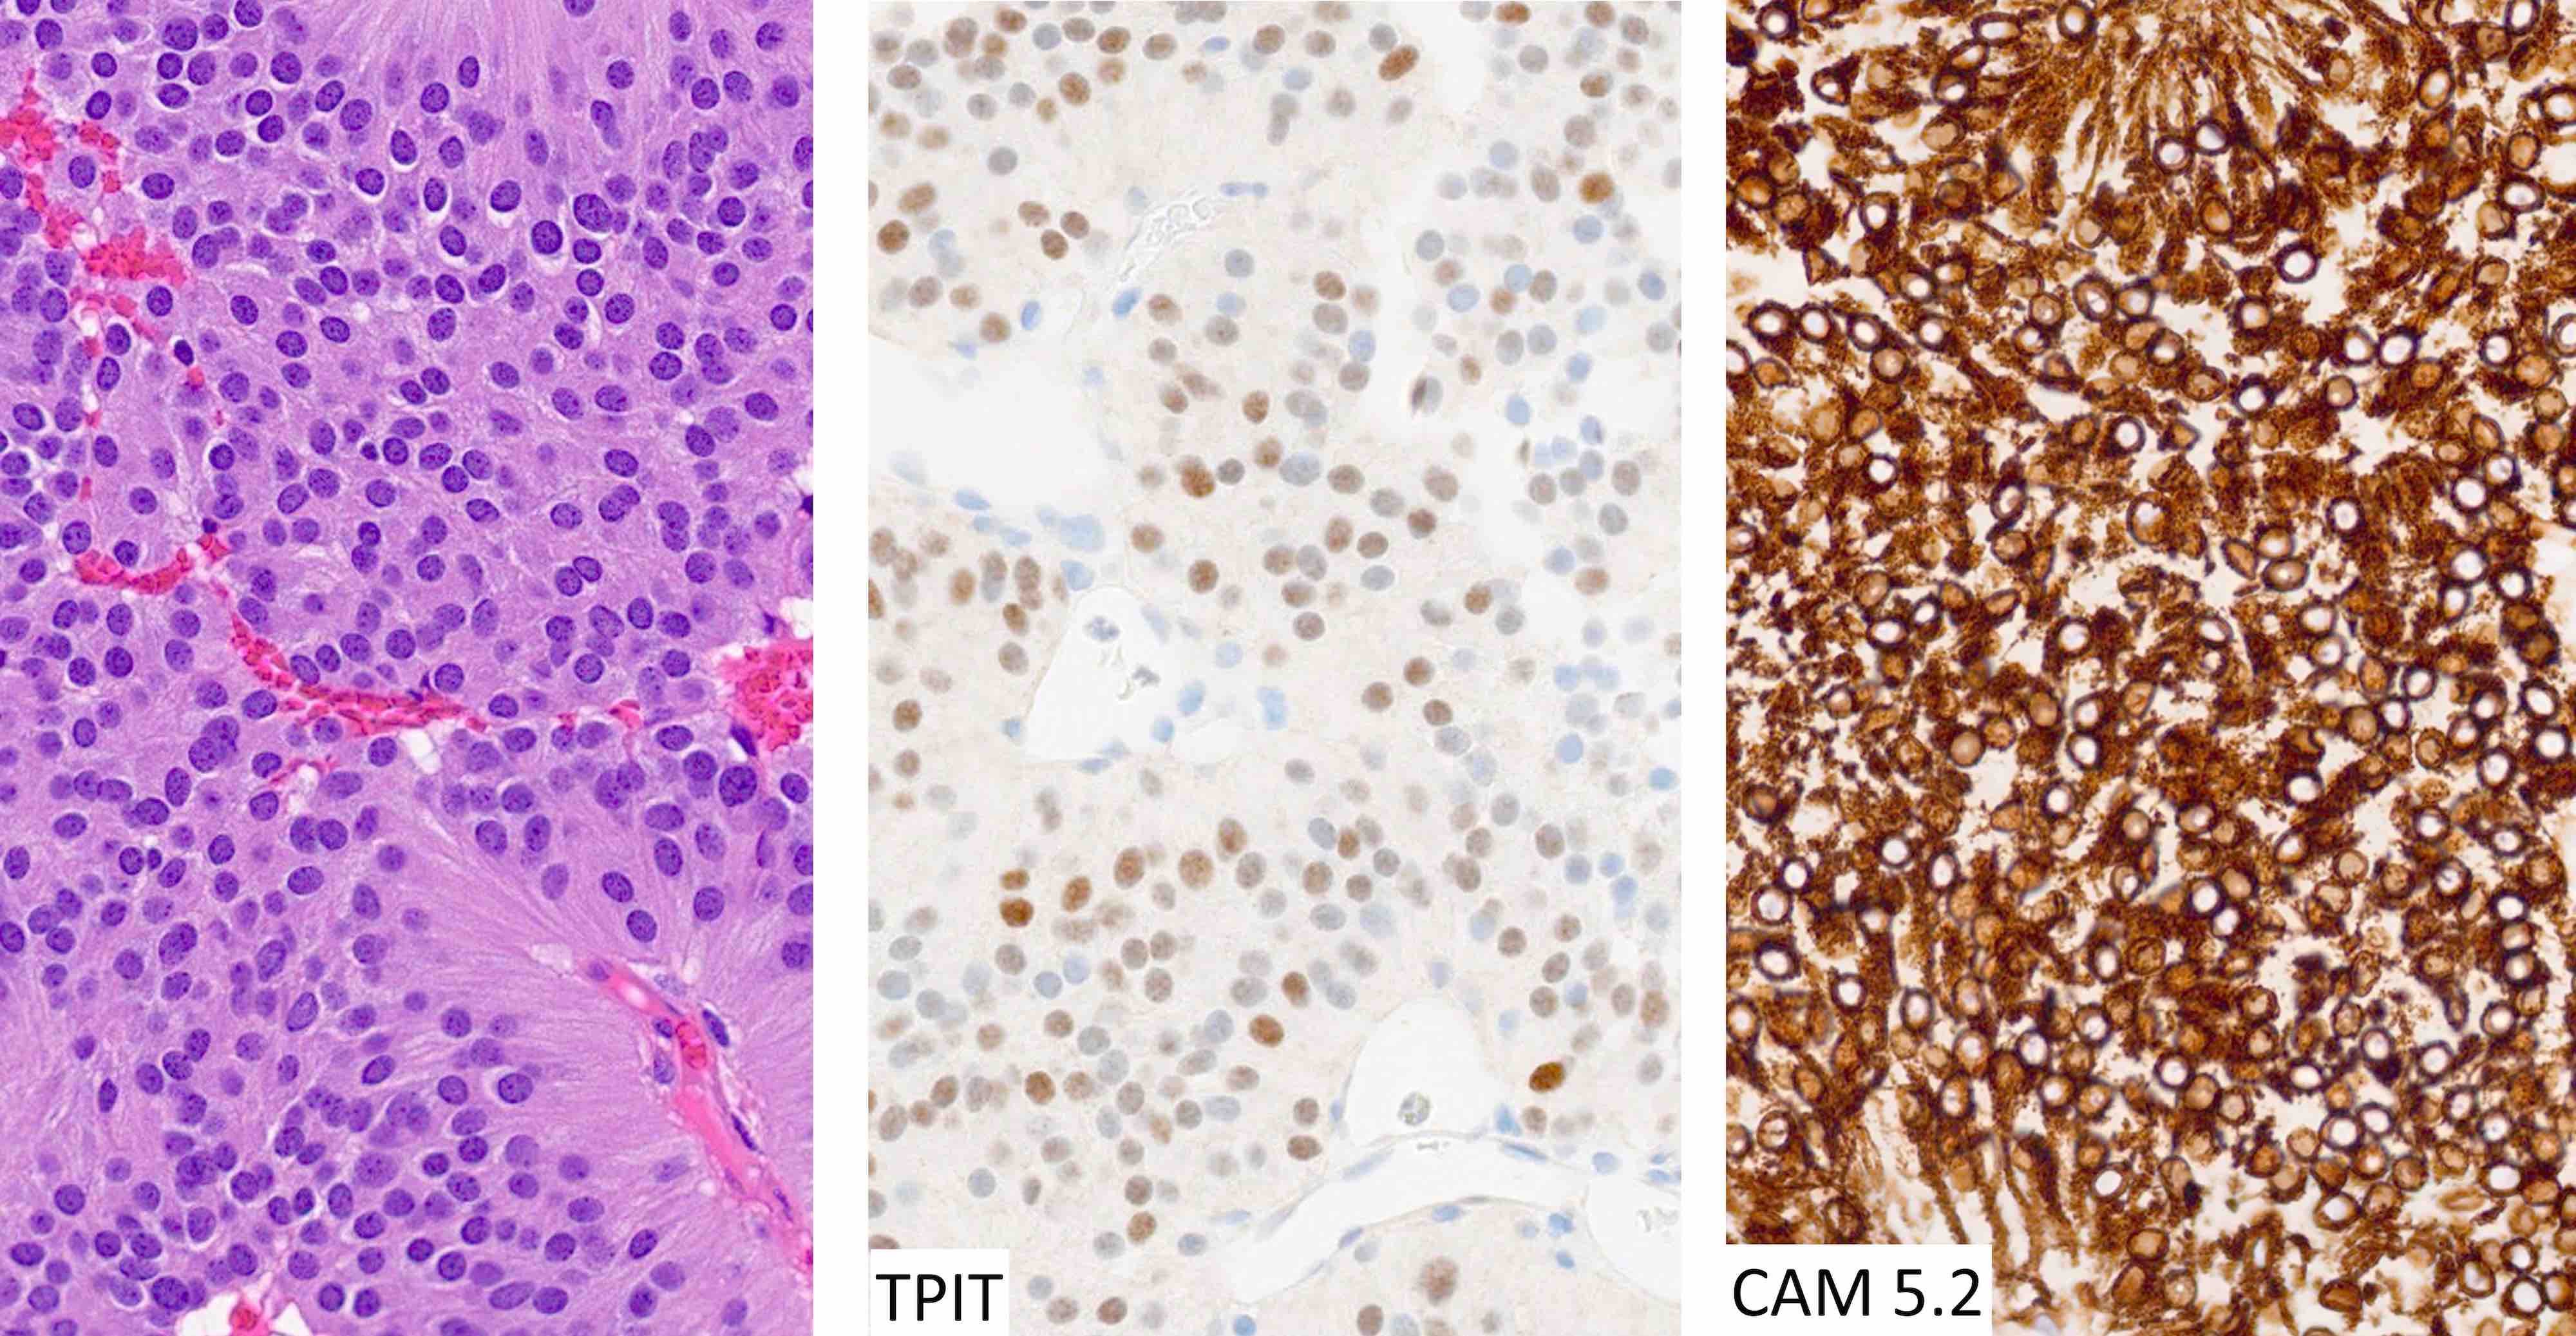 Sparsely granulated corticotroph tumor